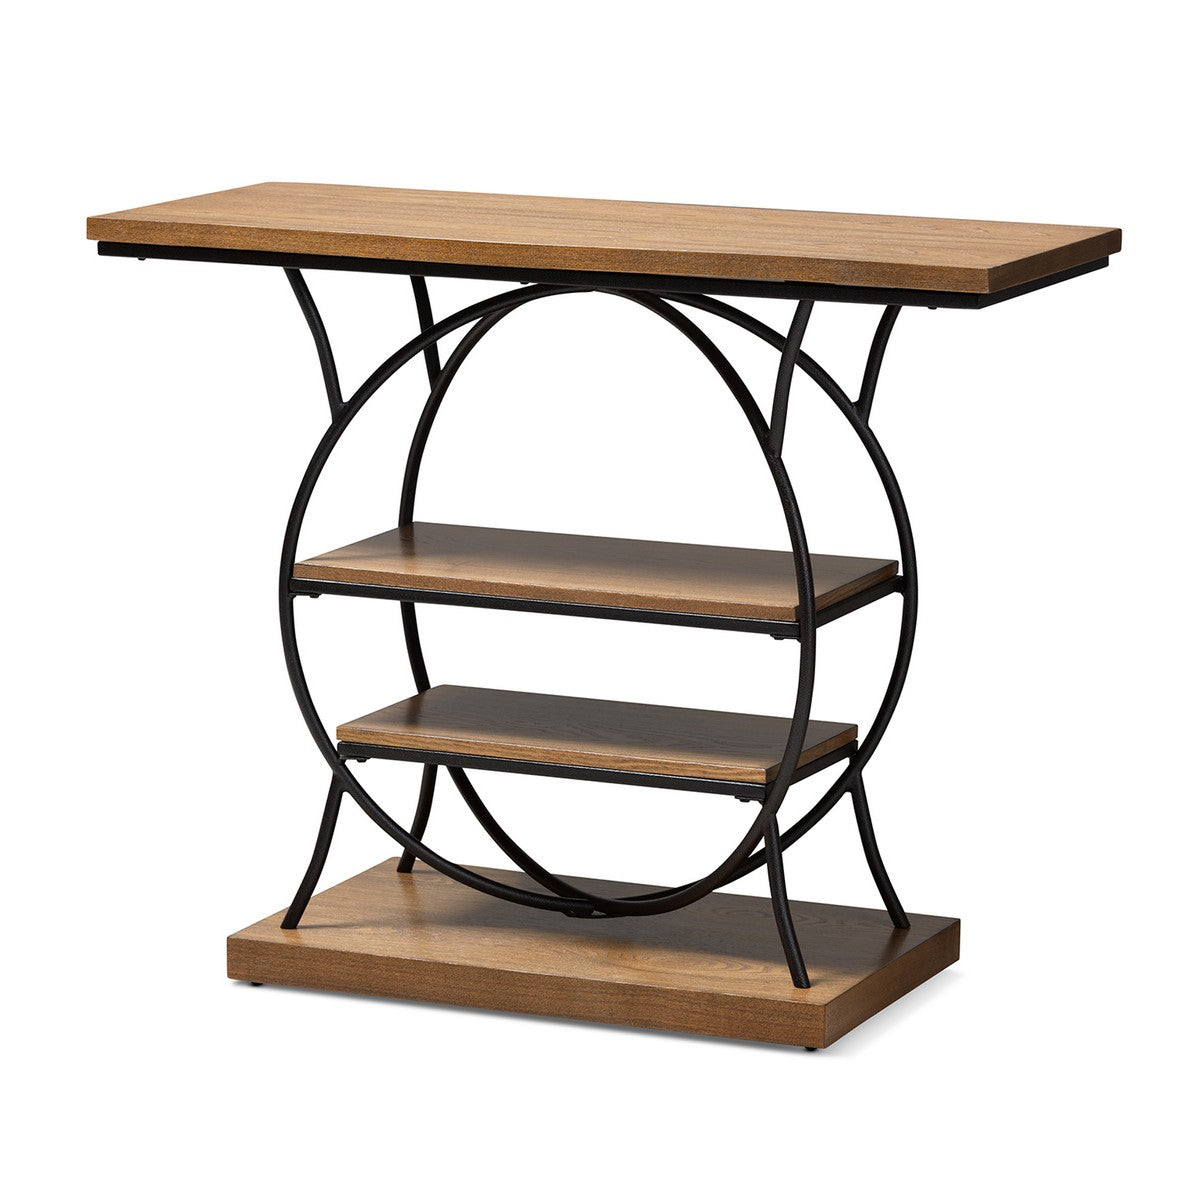 Baxton Studio Lavelle Vintage Rustic Industrial Style Walnut Brown Wood and Dark Bronze-Finished Metal Circular Console Table Baxton Studio-side tables-Minimal And Modern - 1